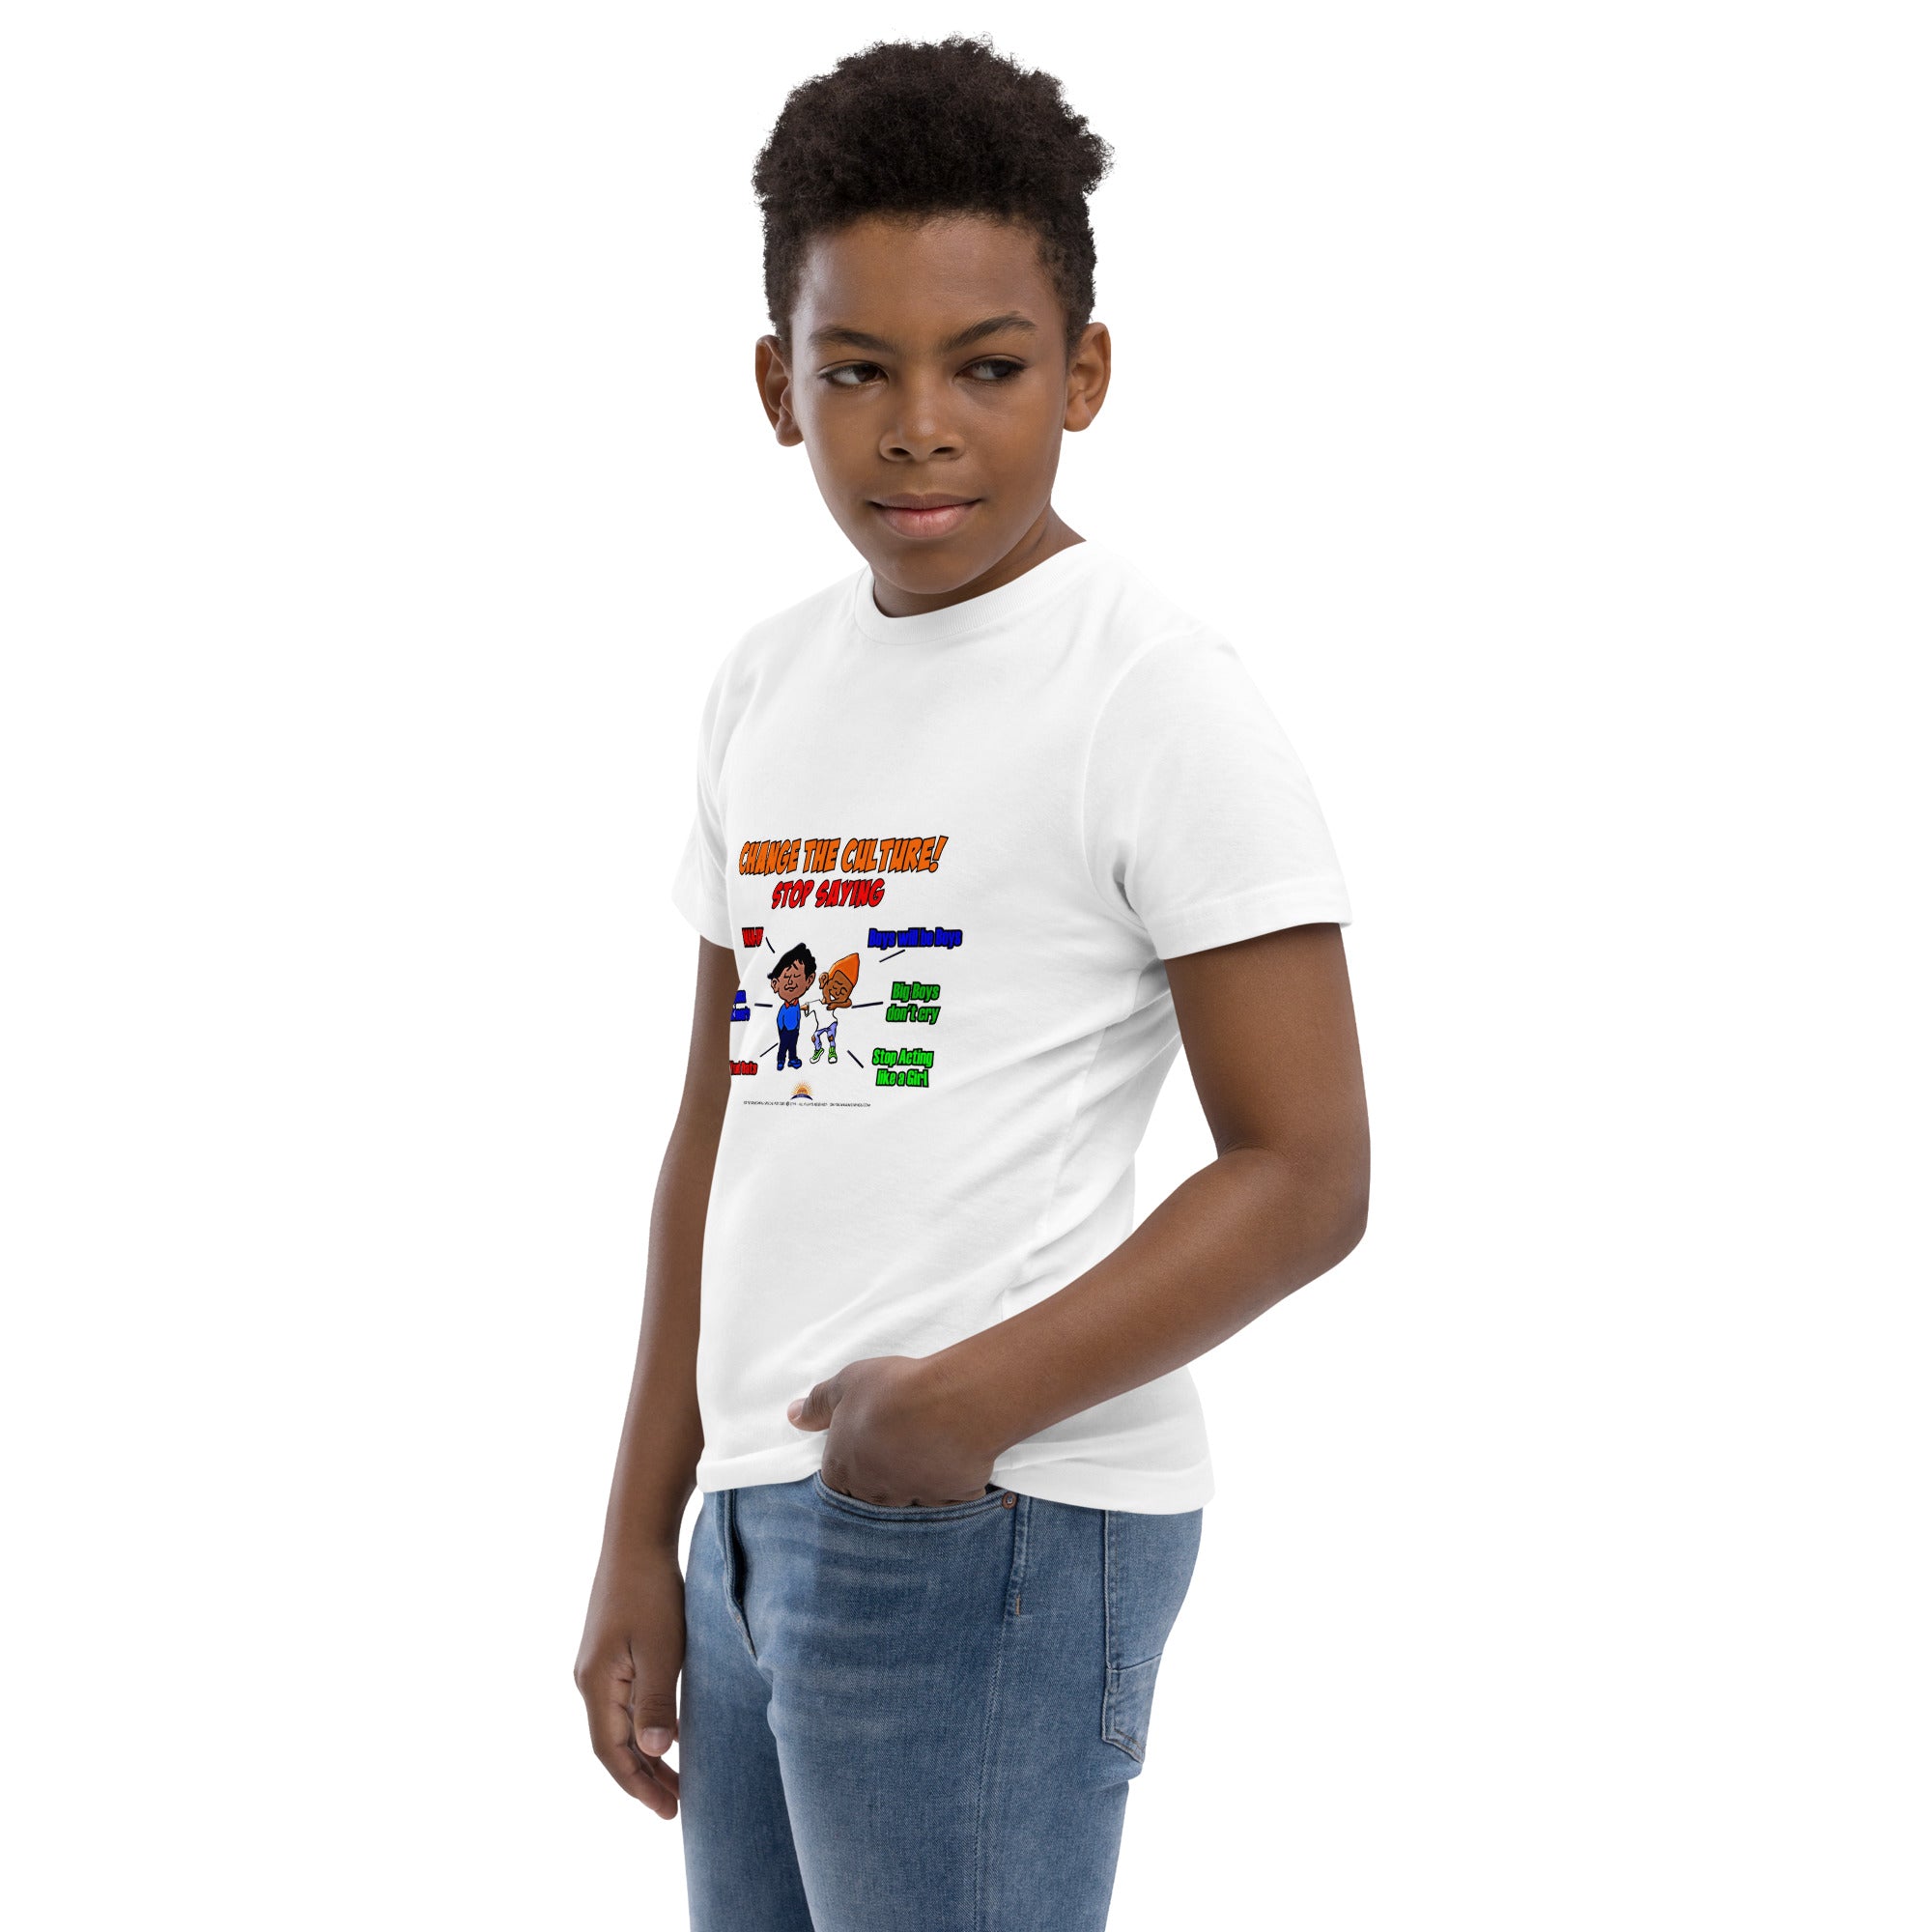 Change The Culture Youth T-Shirt (Stop Saying Boys will be Boys #1)